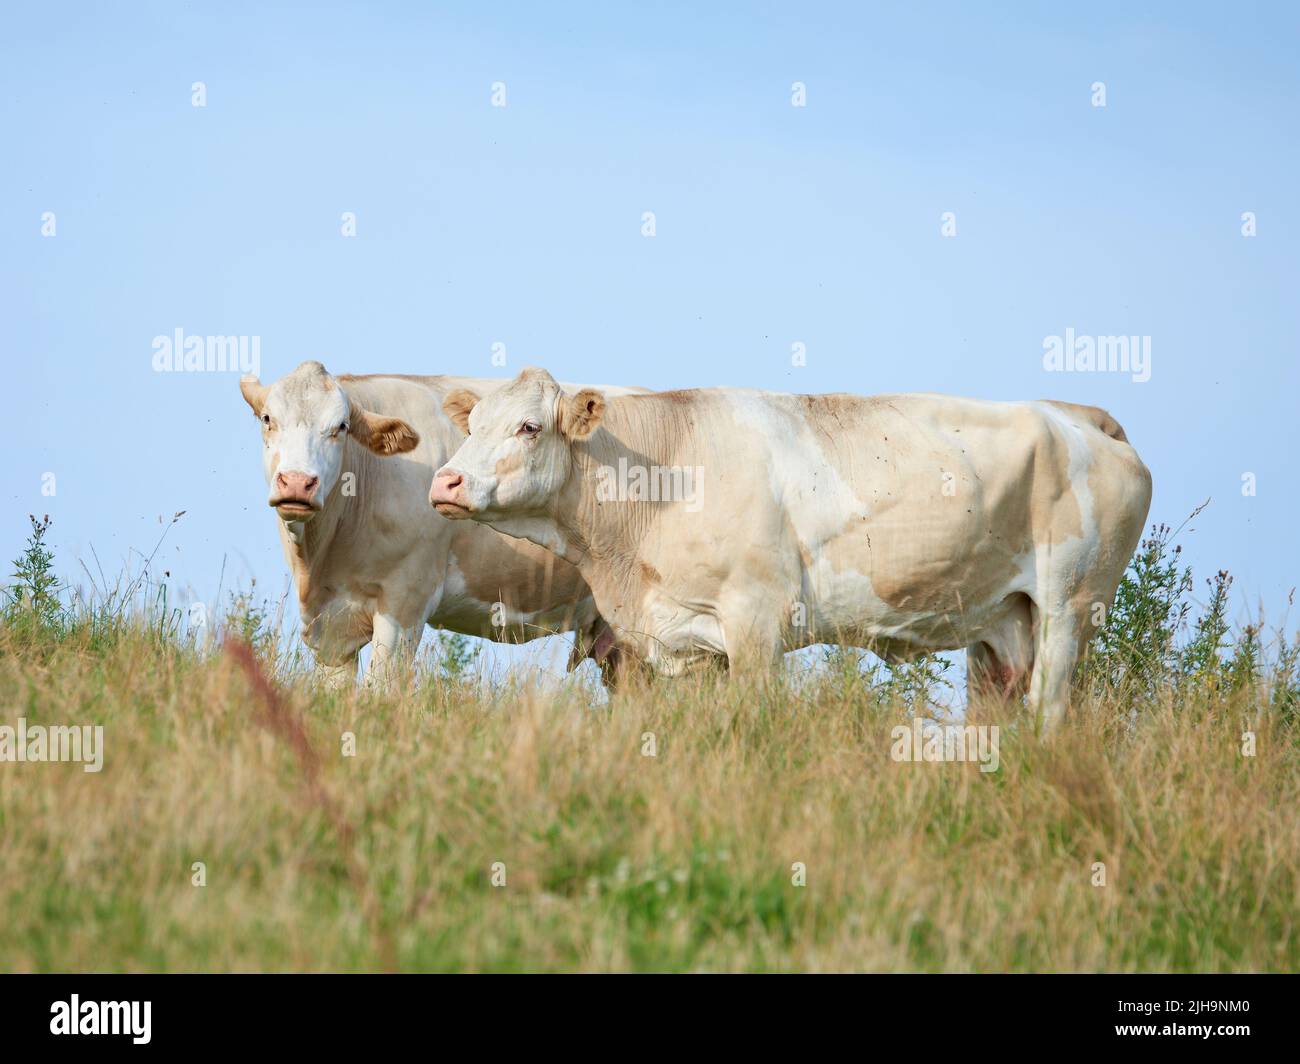 Raising and breeding livestock cattle on a farm for beef and dairy industry. Landscape animals on pasture or grazing land. Two white cows standing on Stock Photo